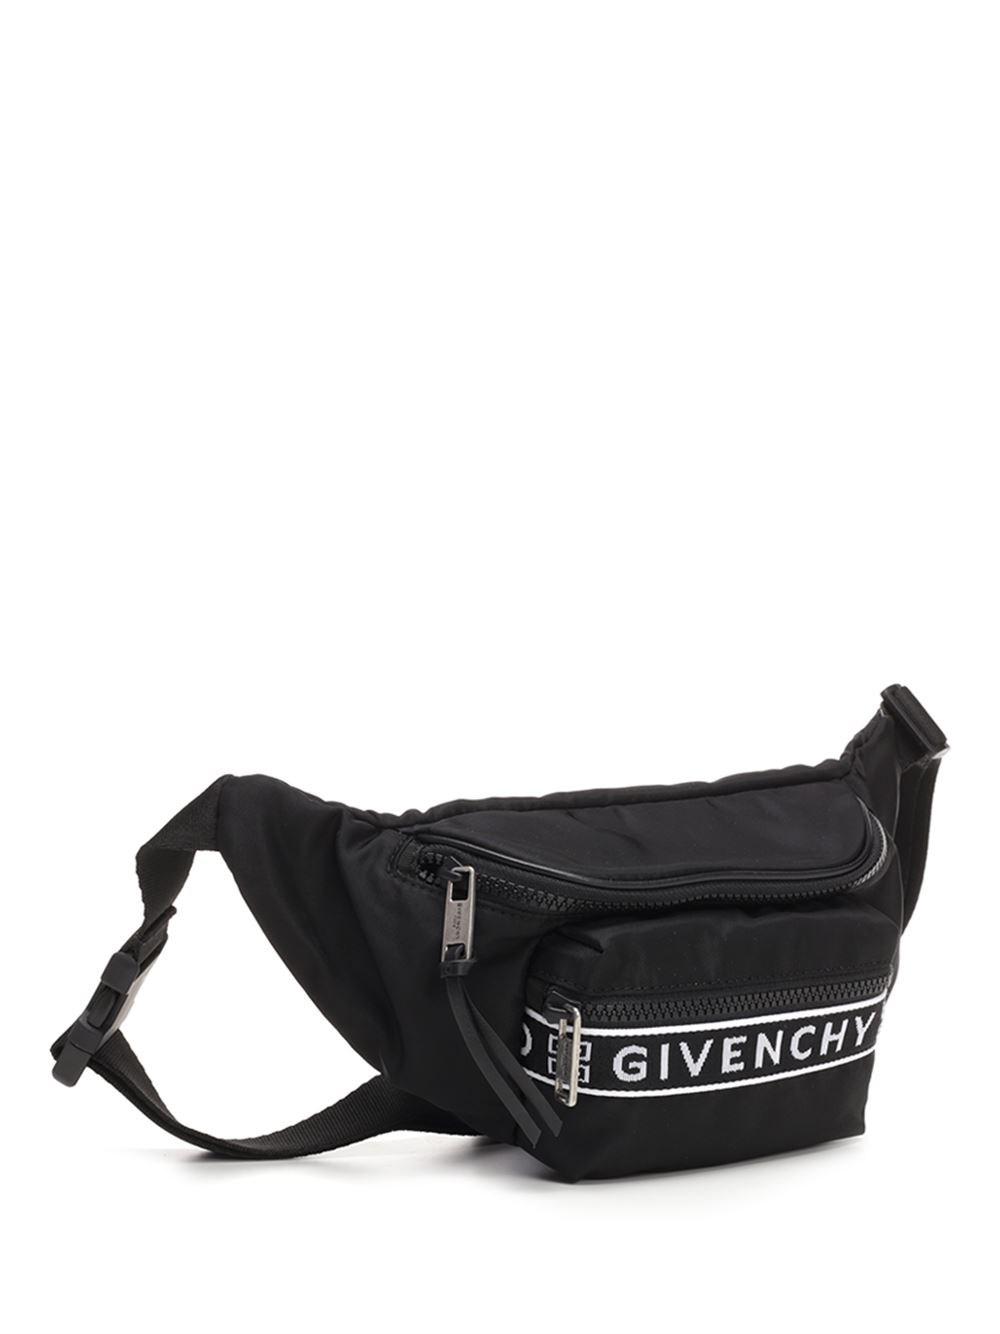 Givenchy Synthetic Black And White 4g Bum Bag for Men - Save 34% - Lyst